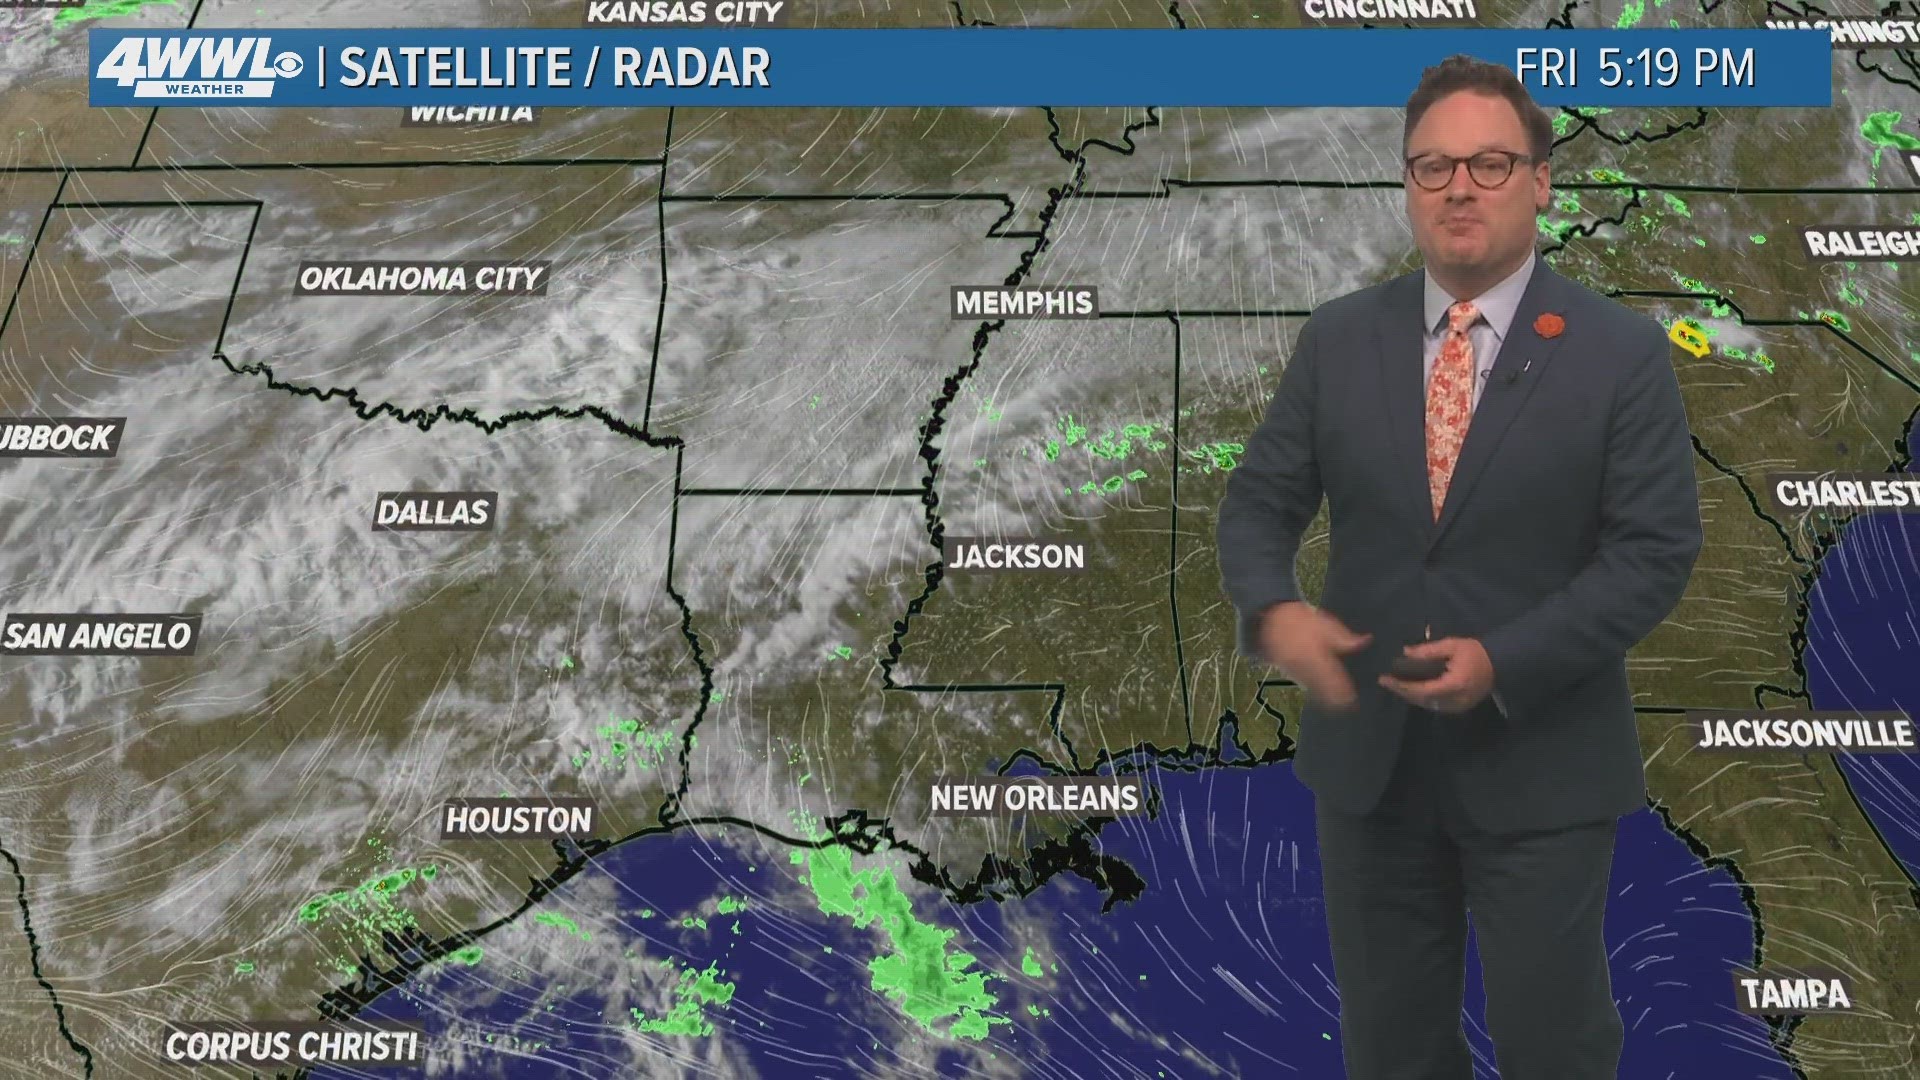 Chief Meteorologist says rain chances for Sunday not appearing to be too great, but a sharp drop in temperatures expected from Saturday into Sunday.